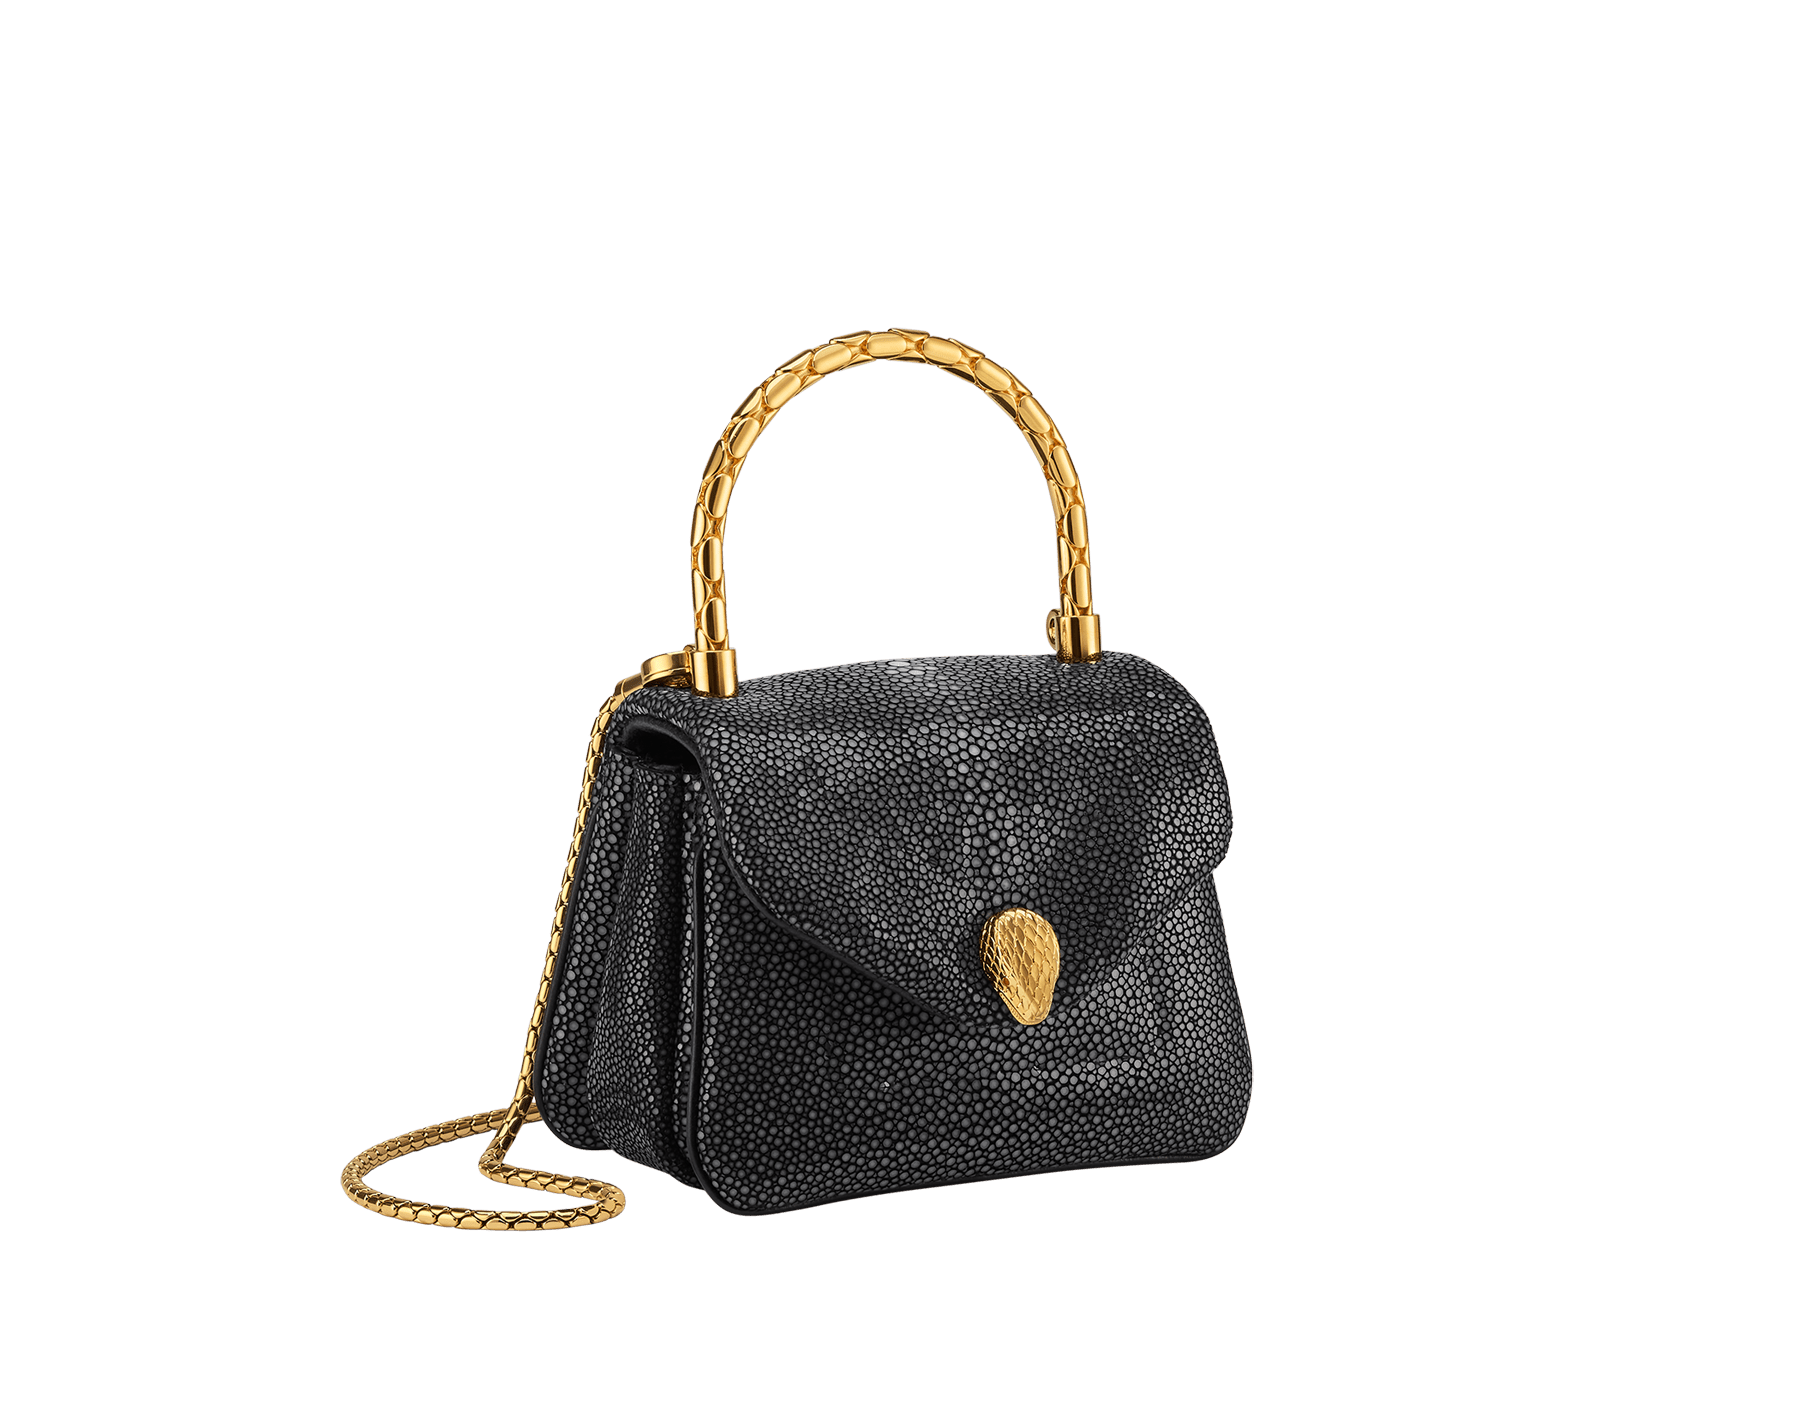 Serpenti Reverse micro top handle bag in soft emerald green galuchat skin with black nappa leather lining. Captivating magnetic snakehead closure in light gold-plated brass embellished with red enamel eyes. SRV-NANOREVERSE image 1